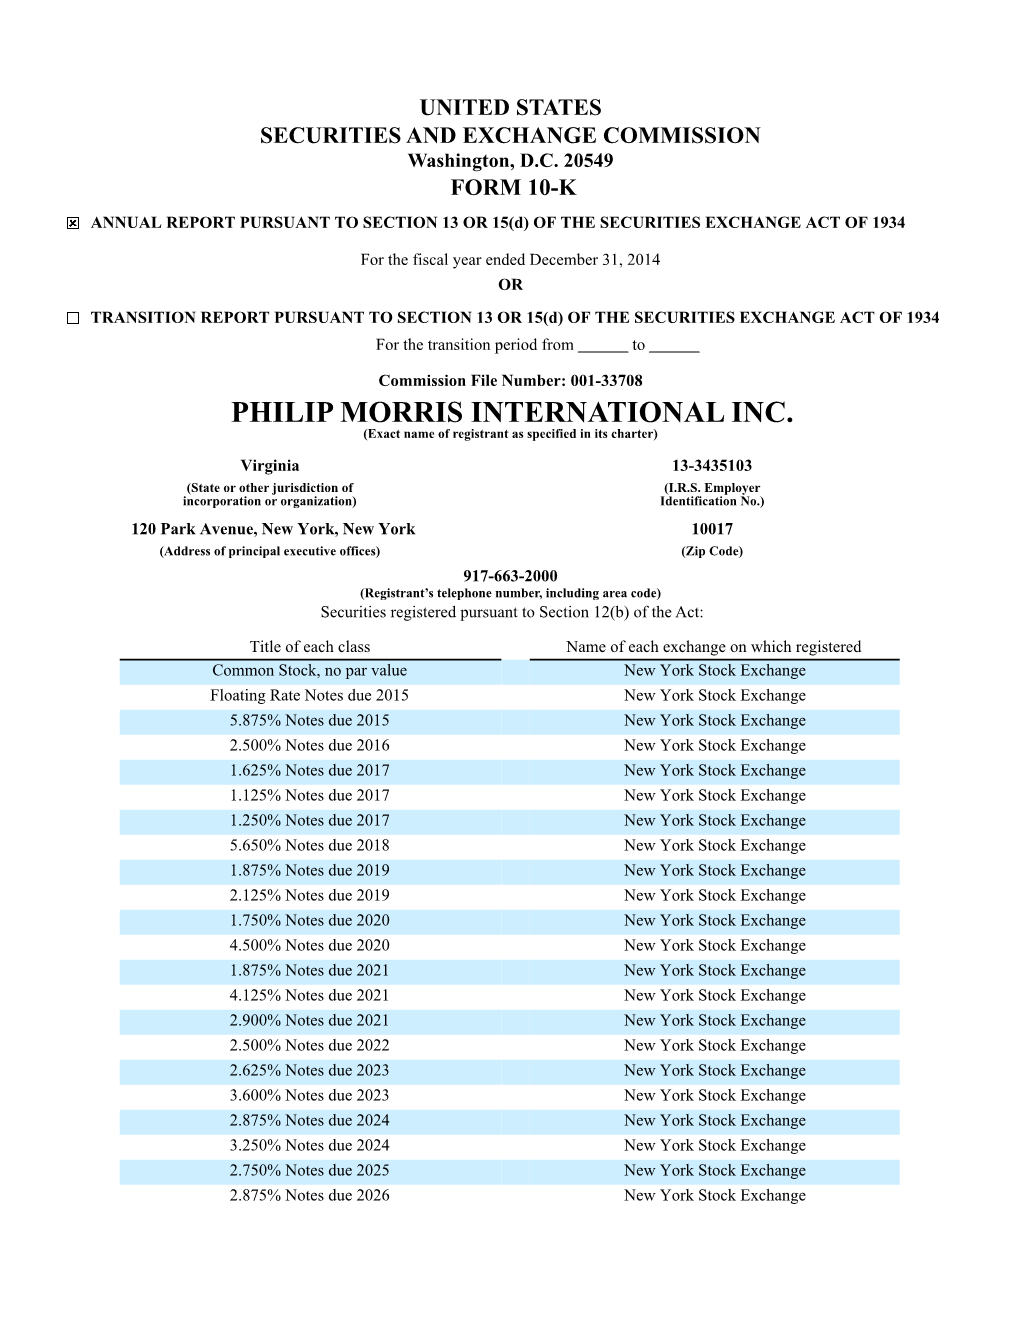 PHILIP MORRIS INTERNATIONAL INC. (Exact Name of Registrant As Specified in Its Charter)